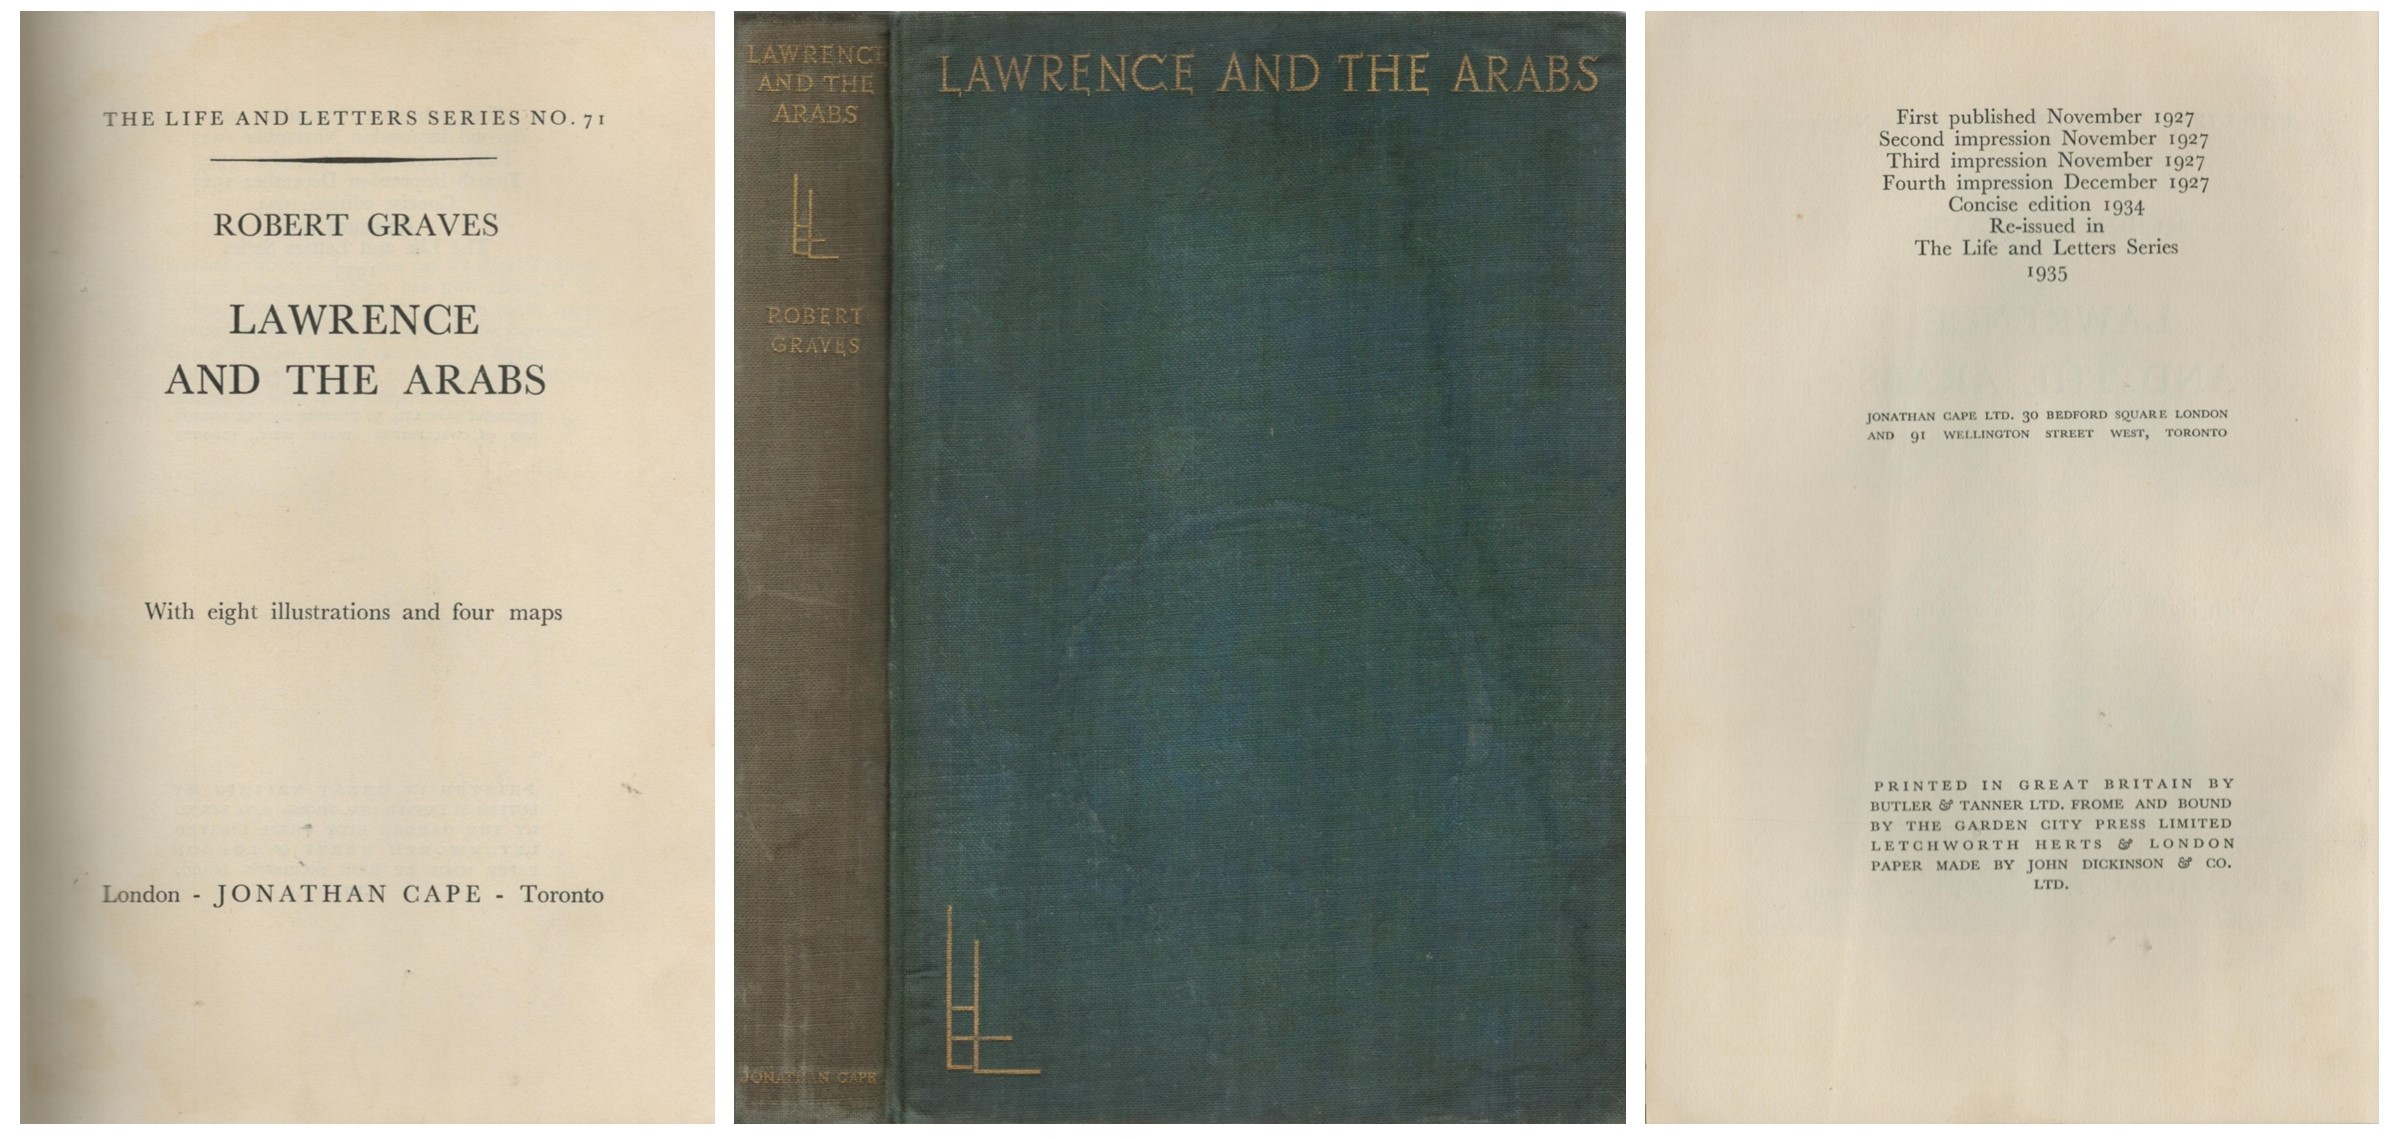 Lawrence And The Arabs. The Life & Letters Series 1935, Volume 7 I. Hardback book. Robert Graves. - Image 2 of 2